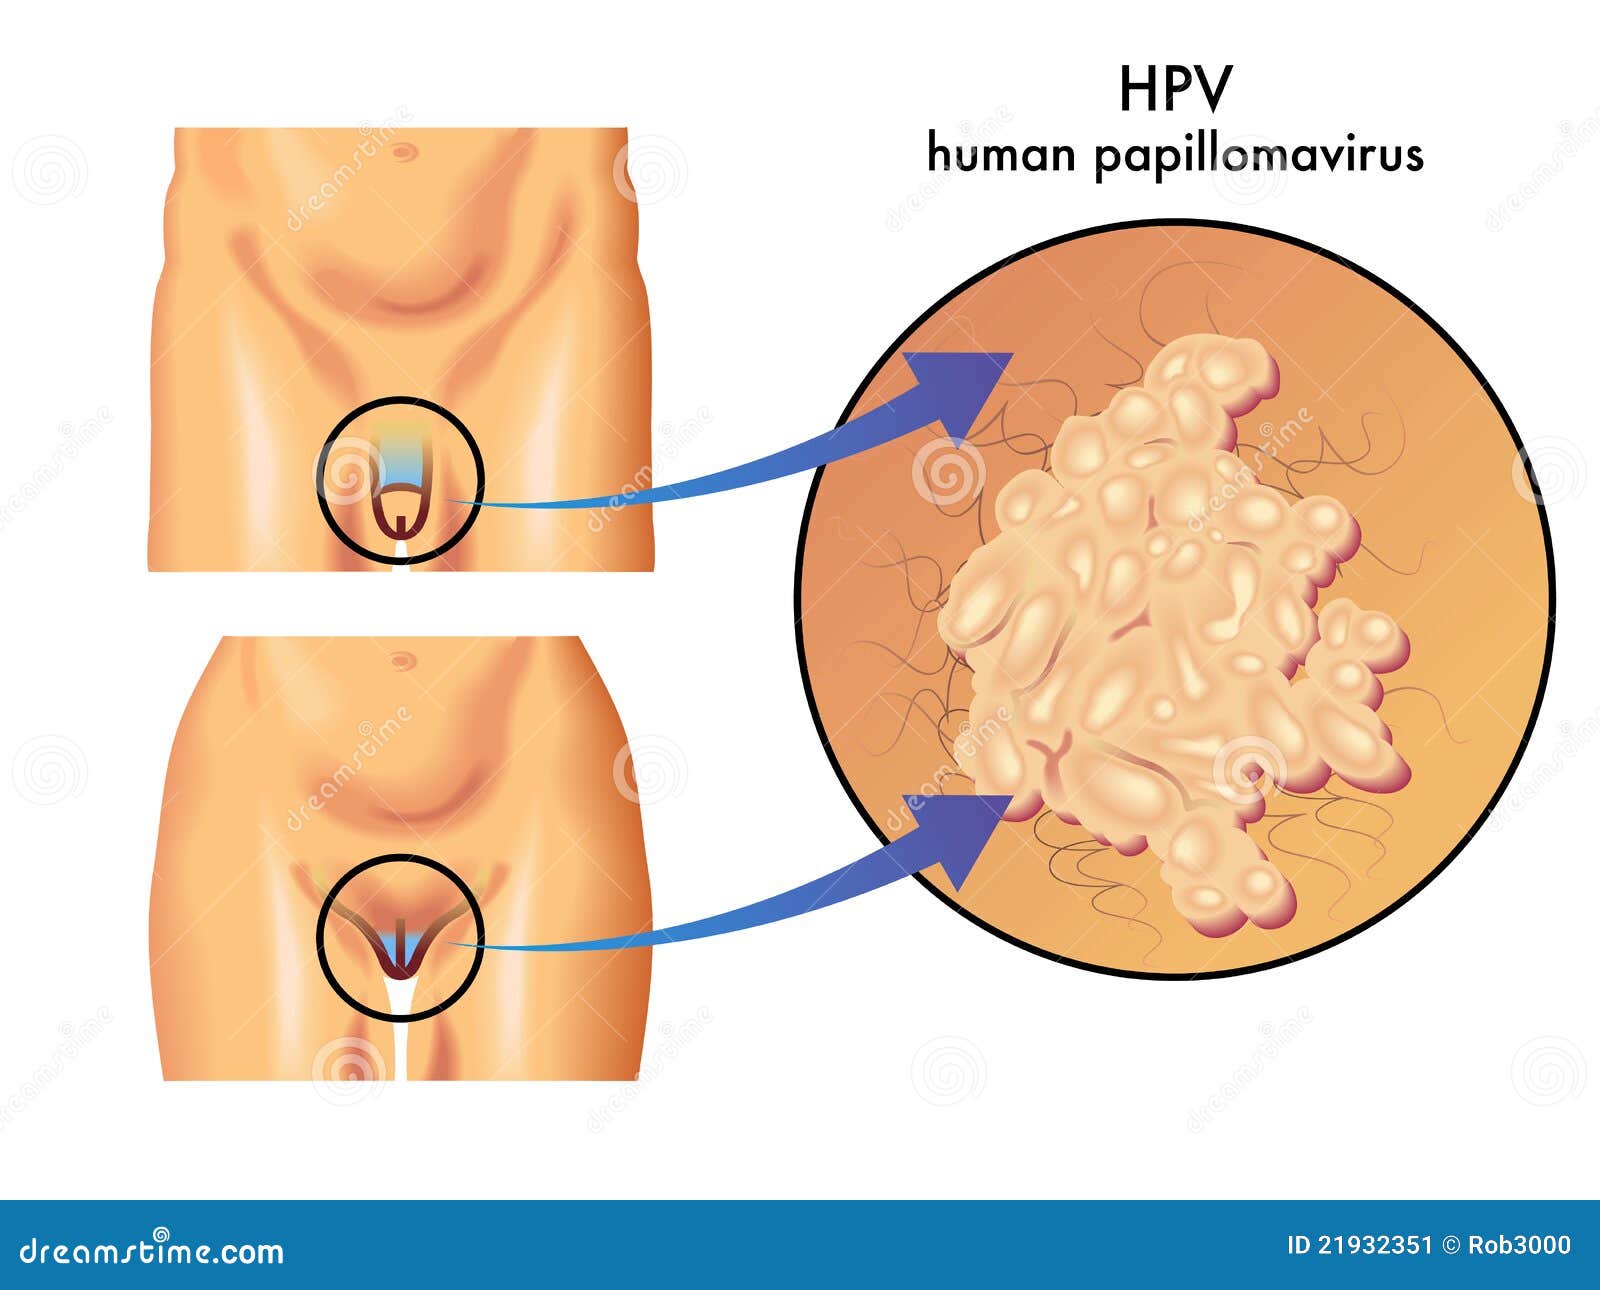 hpv for papilloma